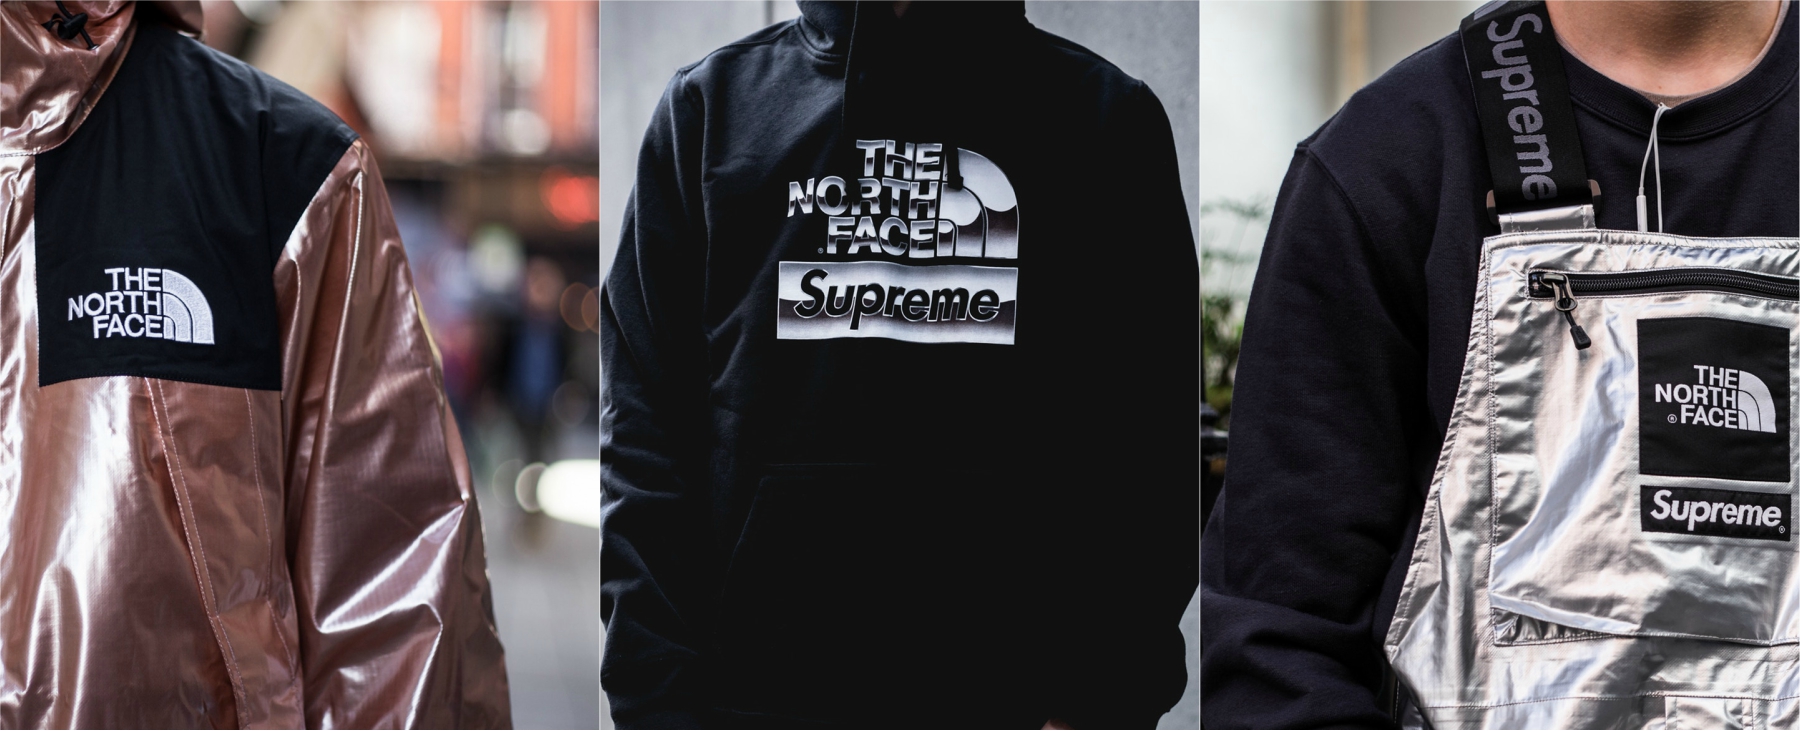 What do New York and London youth look at on the release of the Supreme x The North Face Metallic collection?